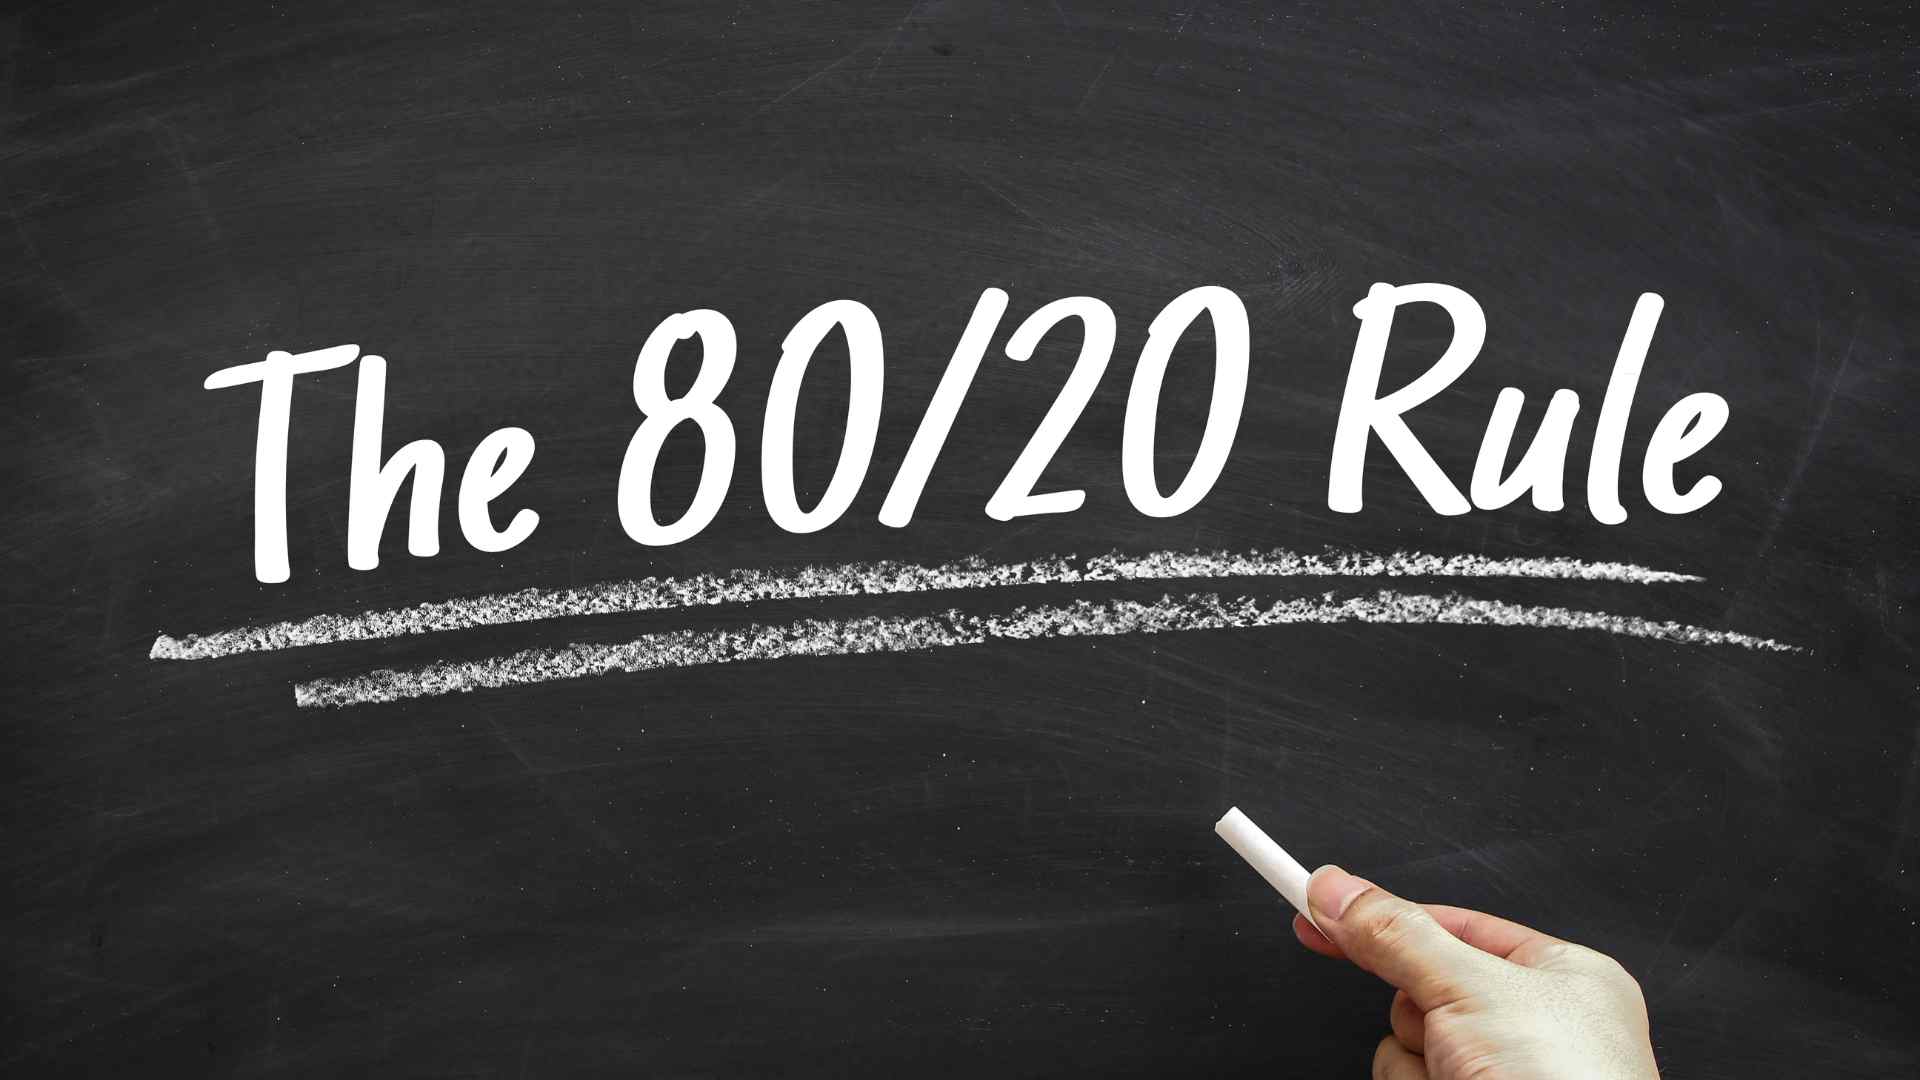 What is the 80/20 rule, and how does it apply to e-commerce?